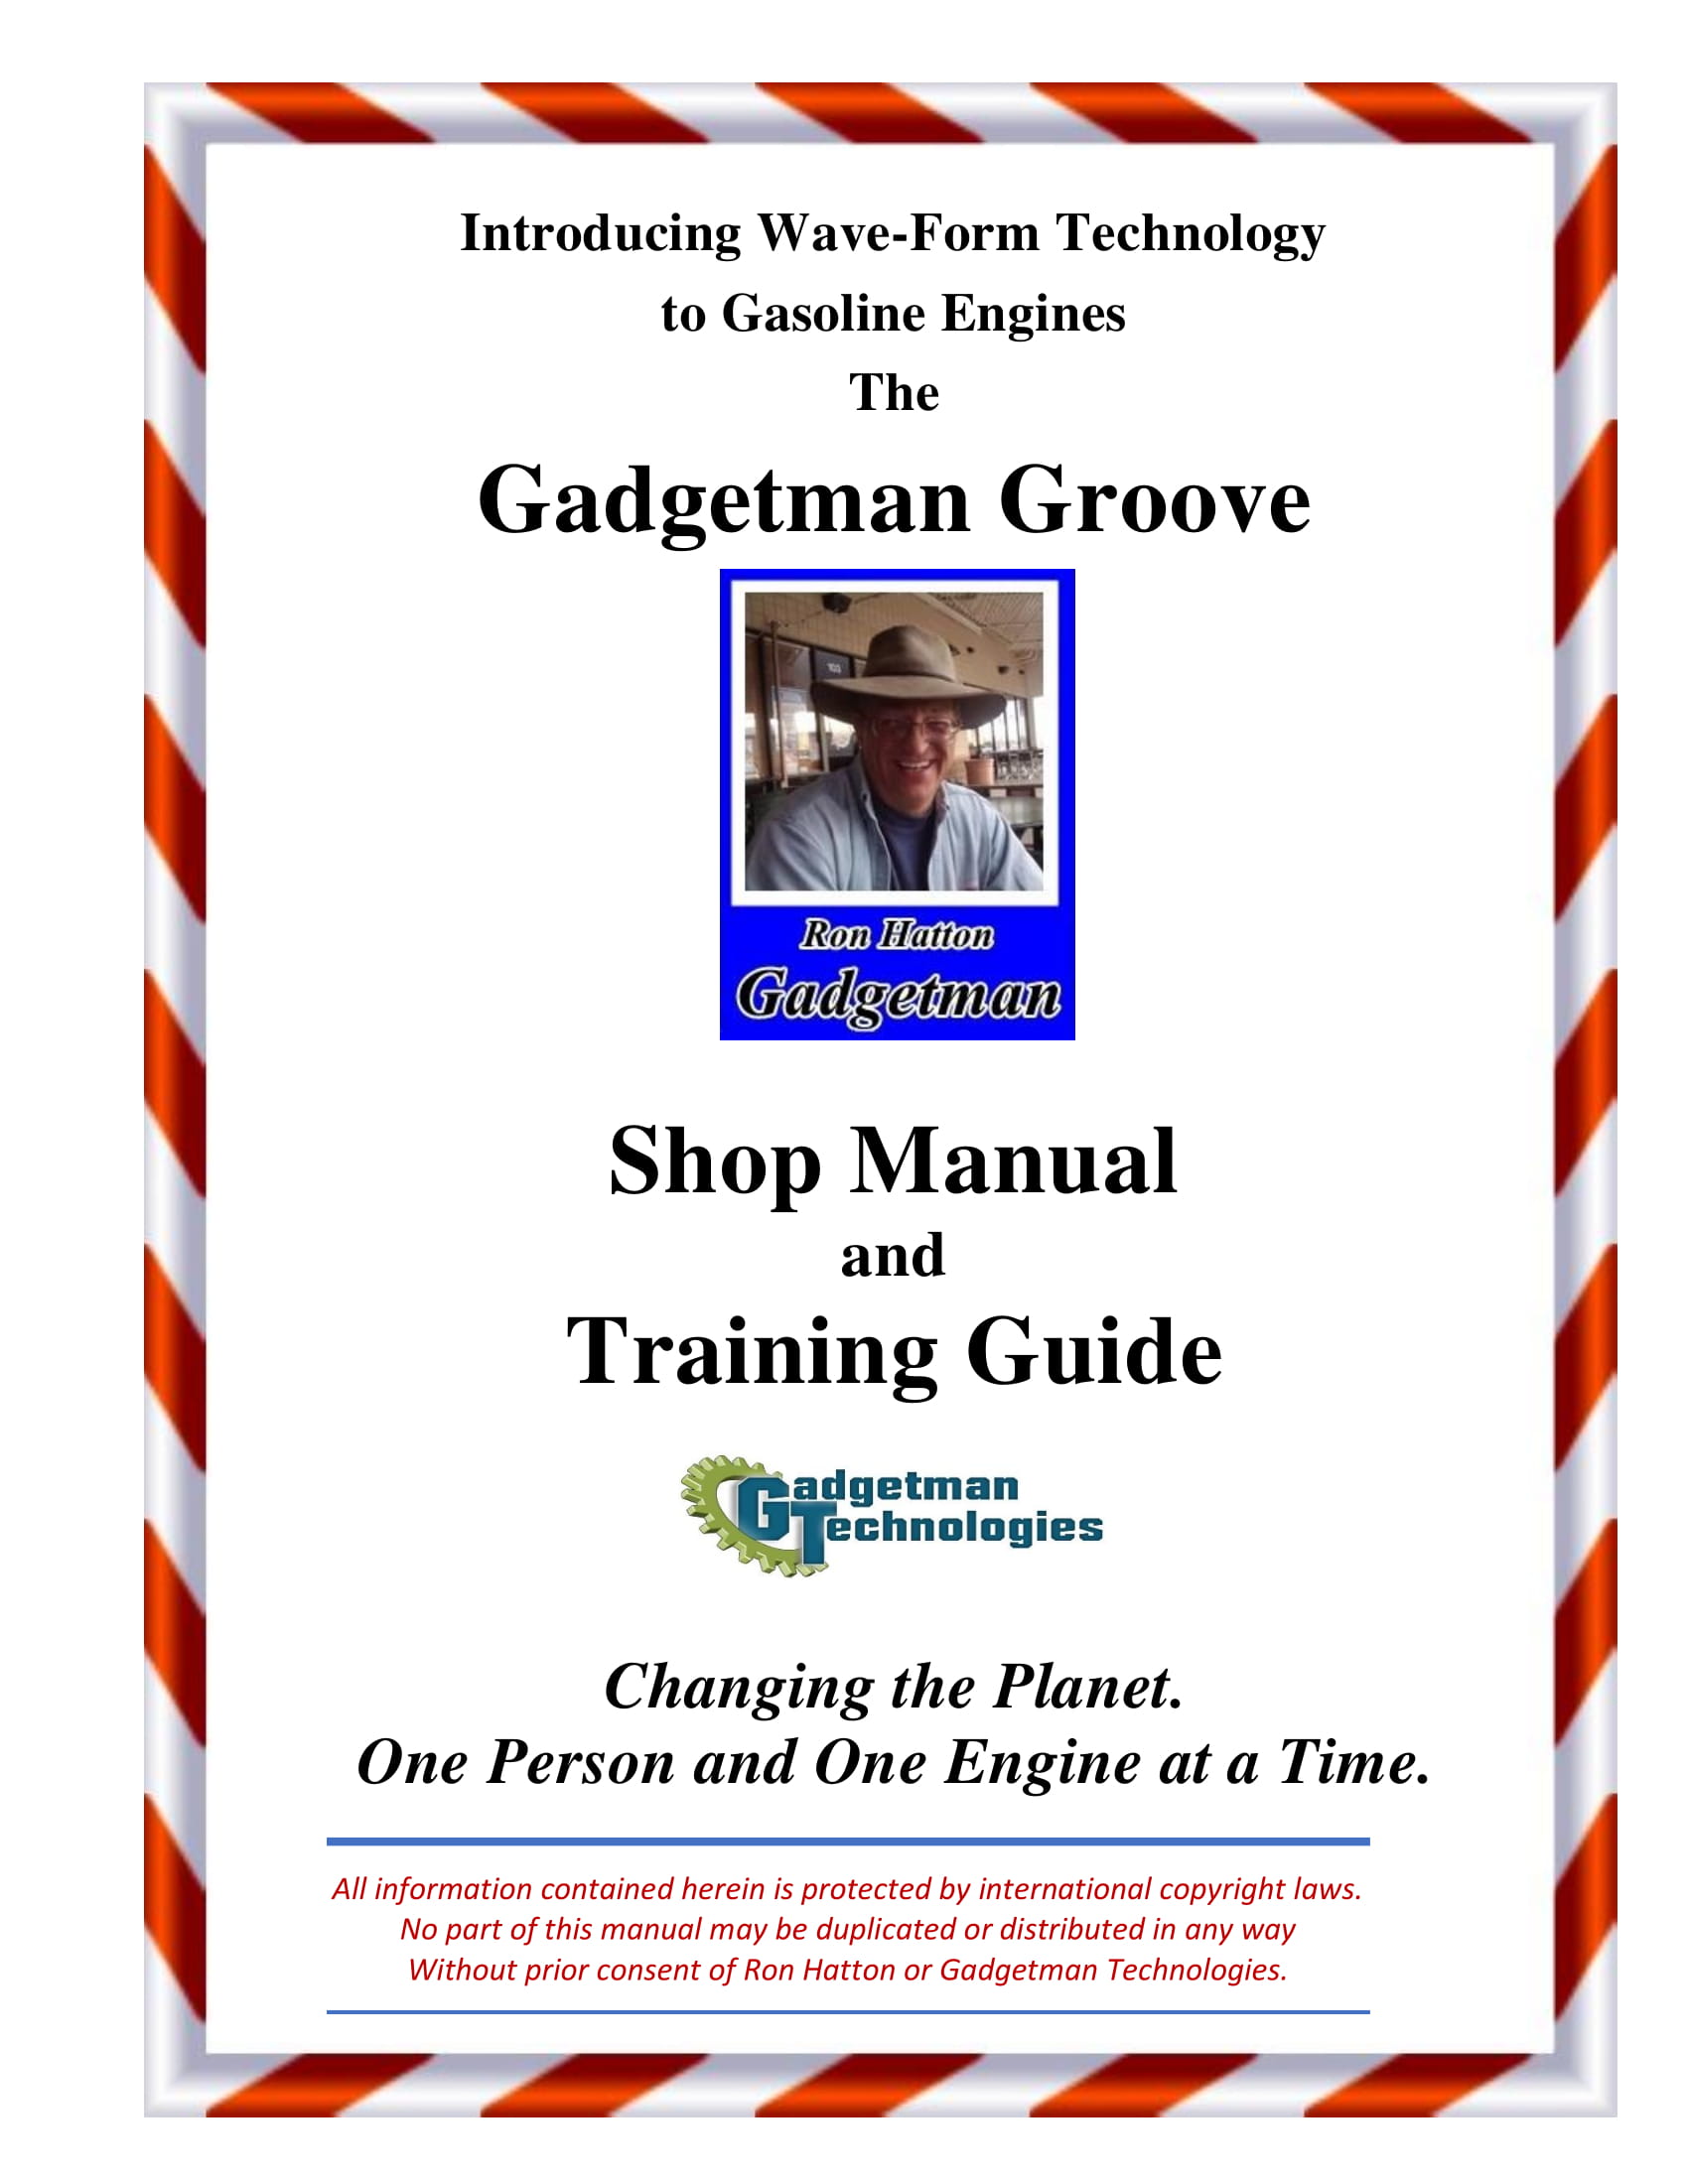 Personal License for The Gadgetman Groove